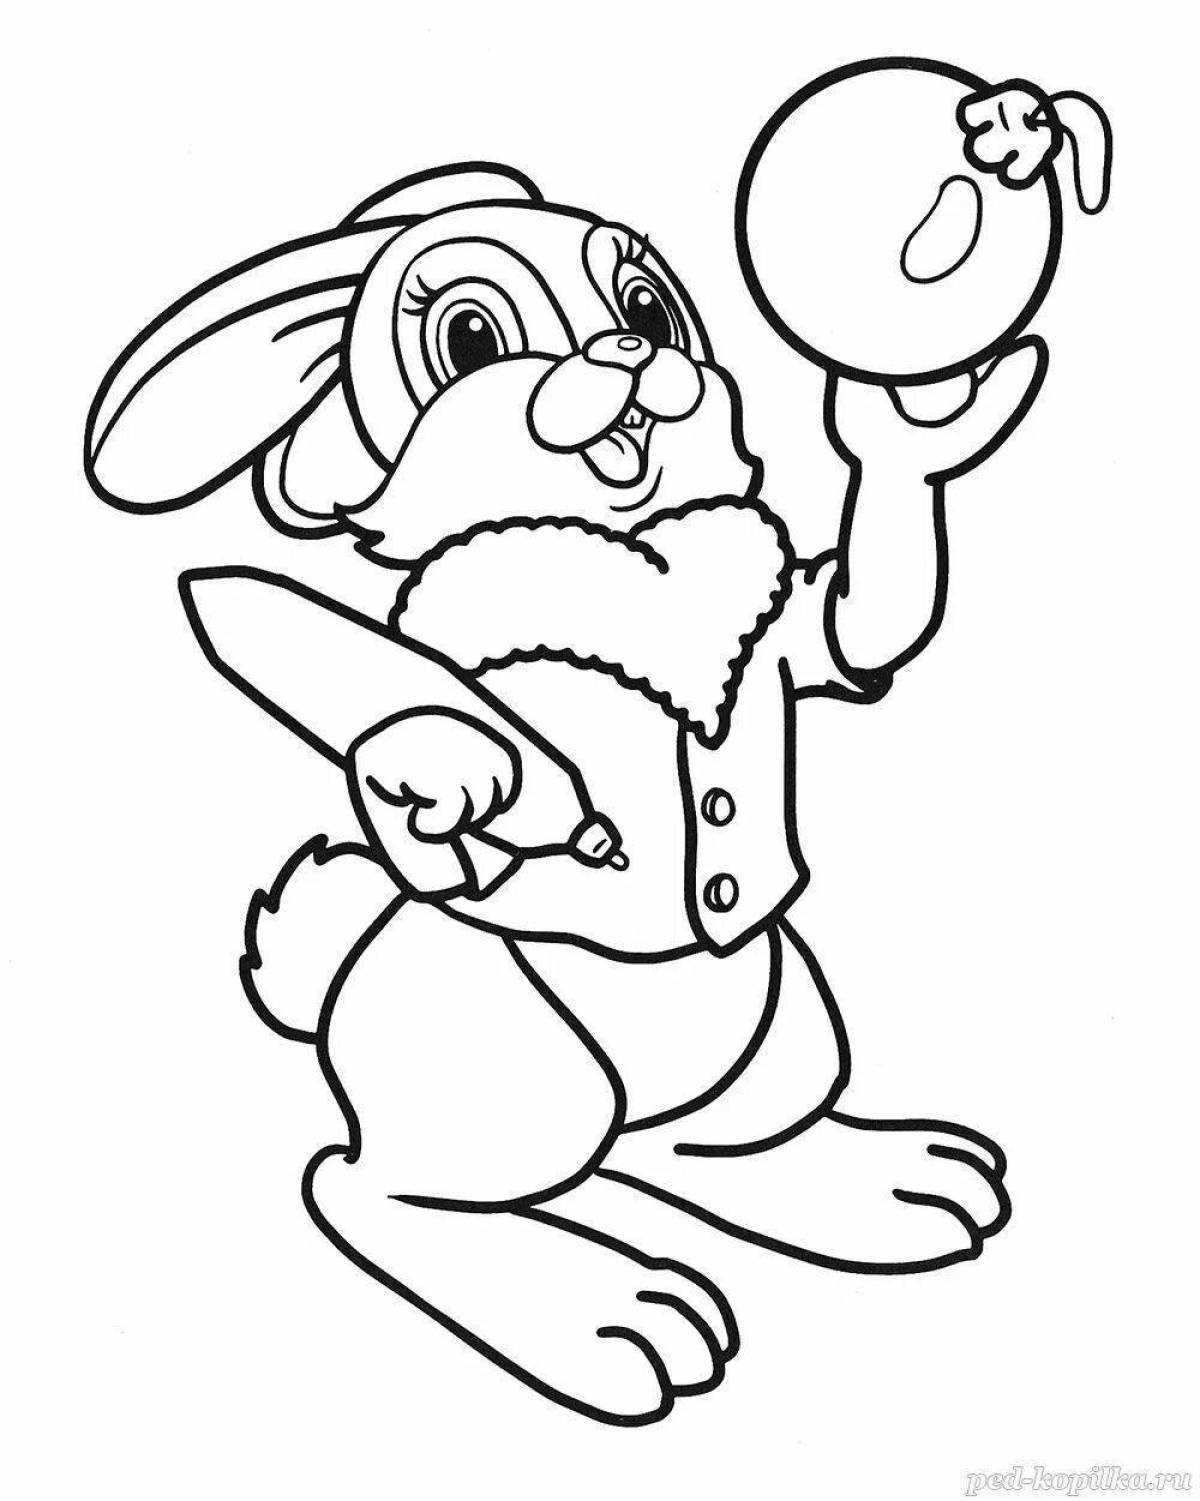 Snicker rabbit coloring book